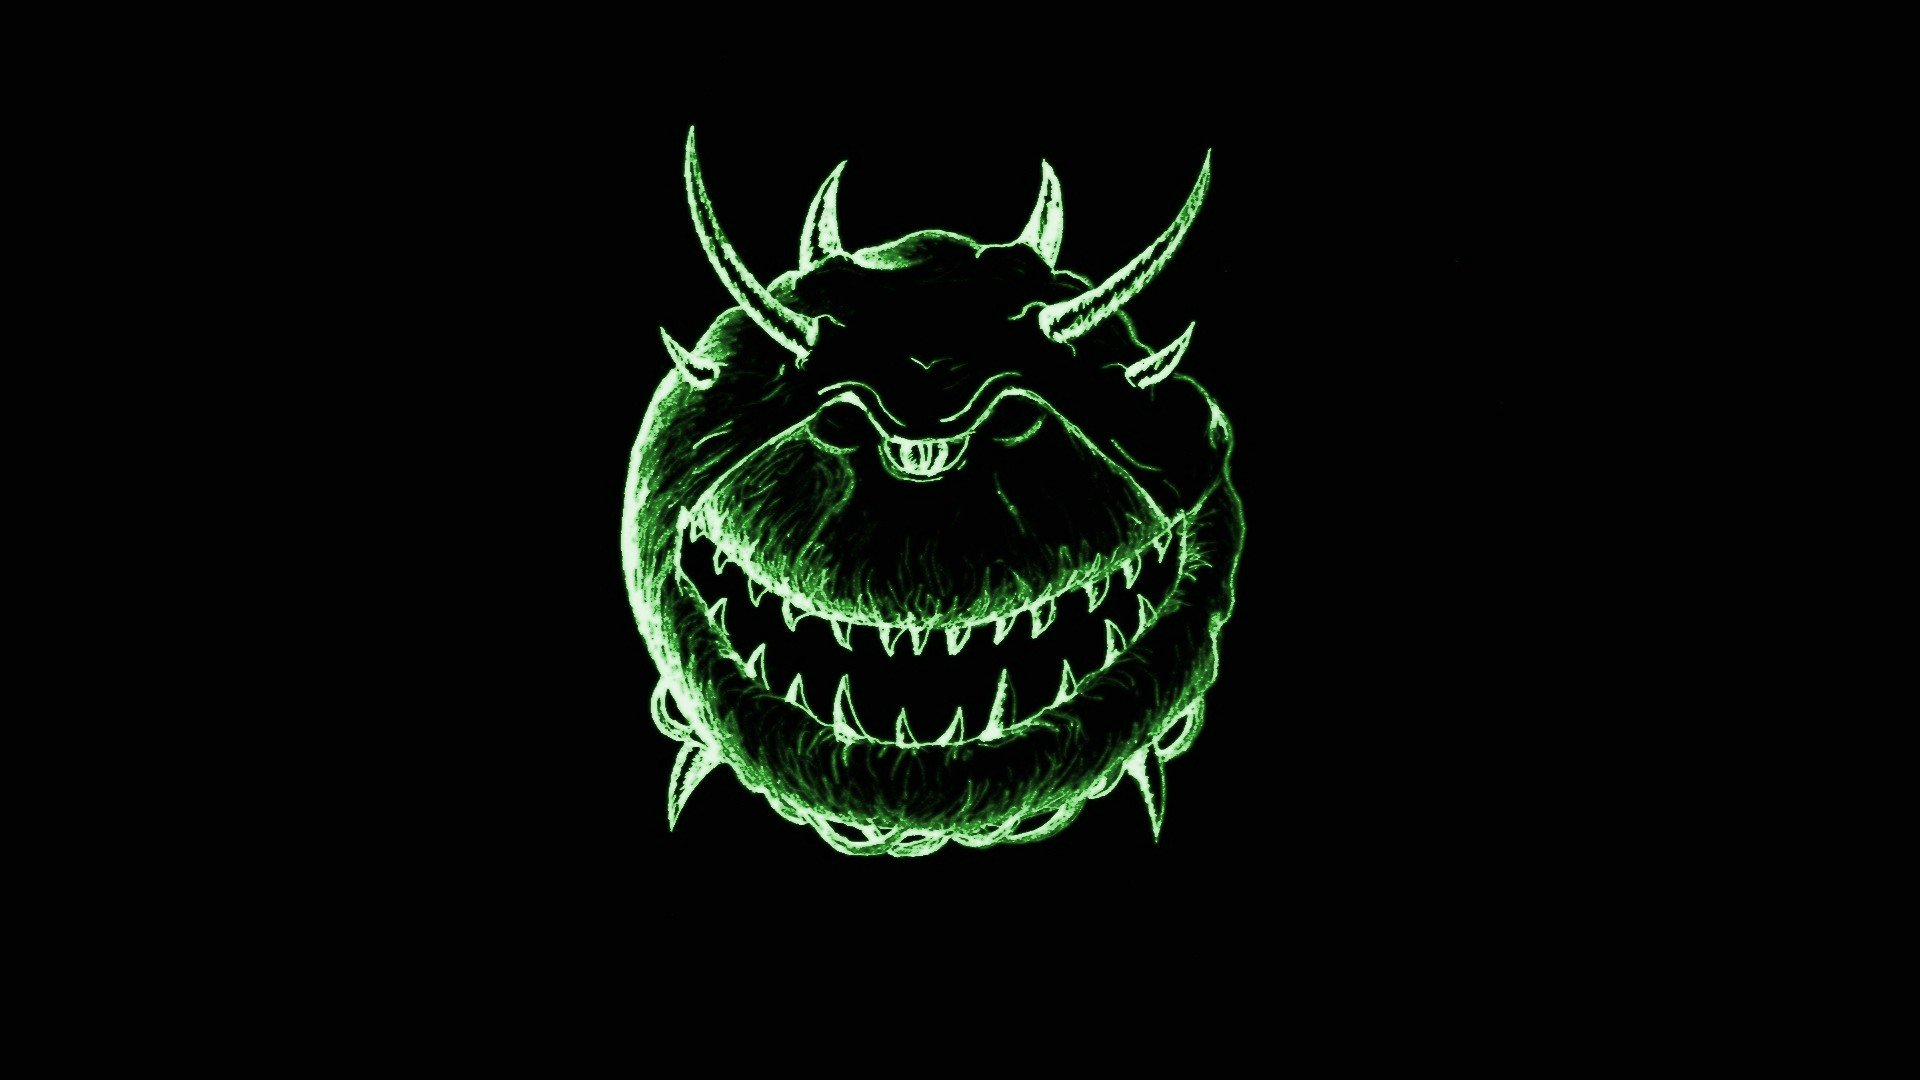 Green abstract video games demons horns Doom smiling retro games cacodemon wallpaperx1080